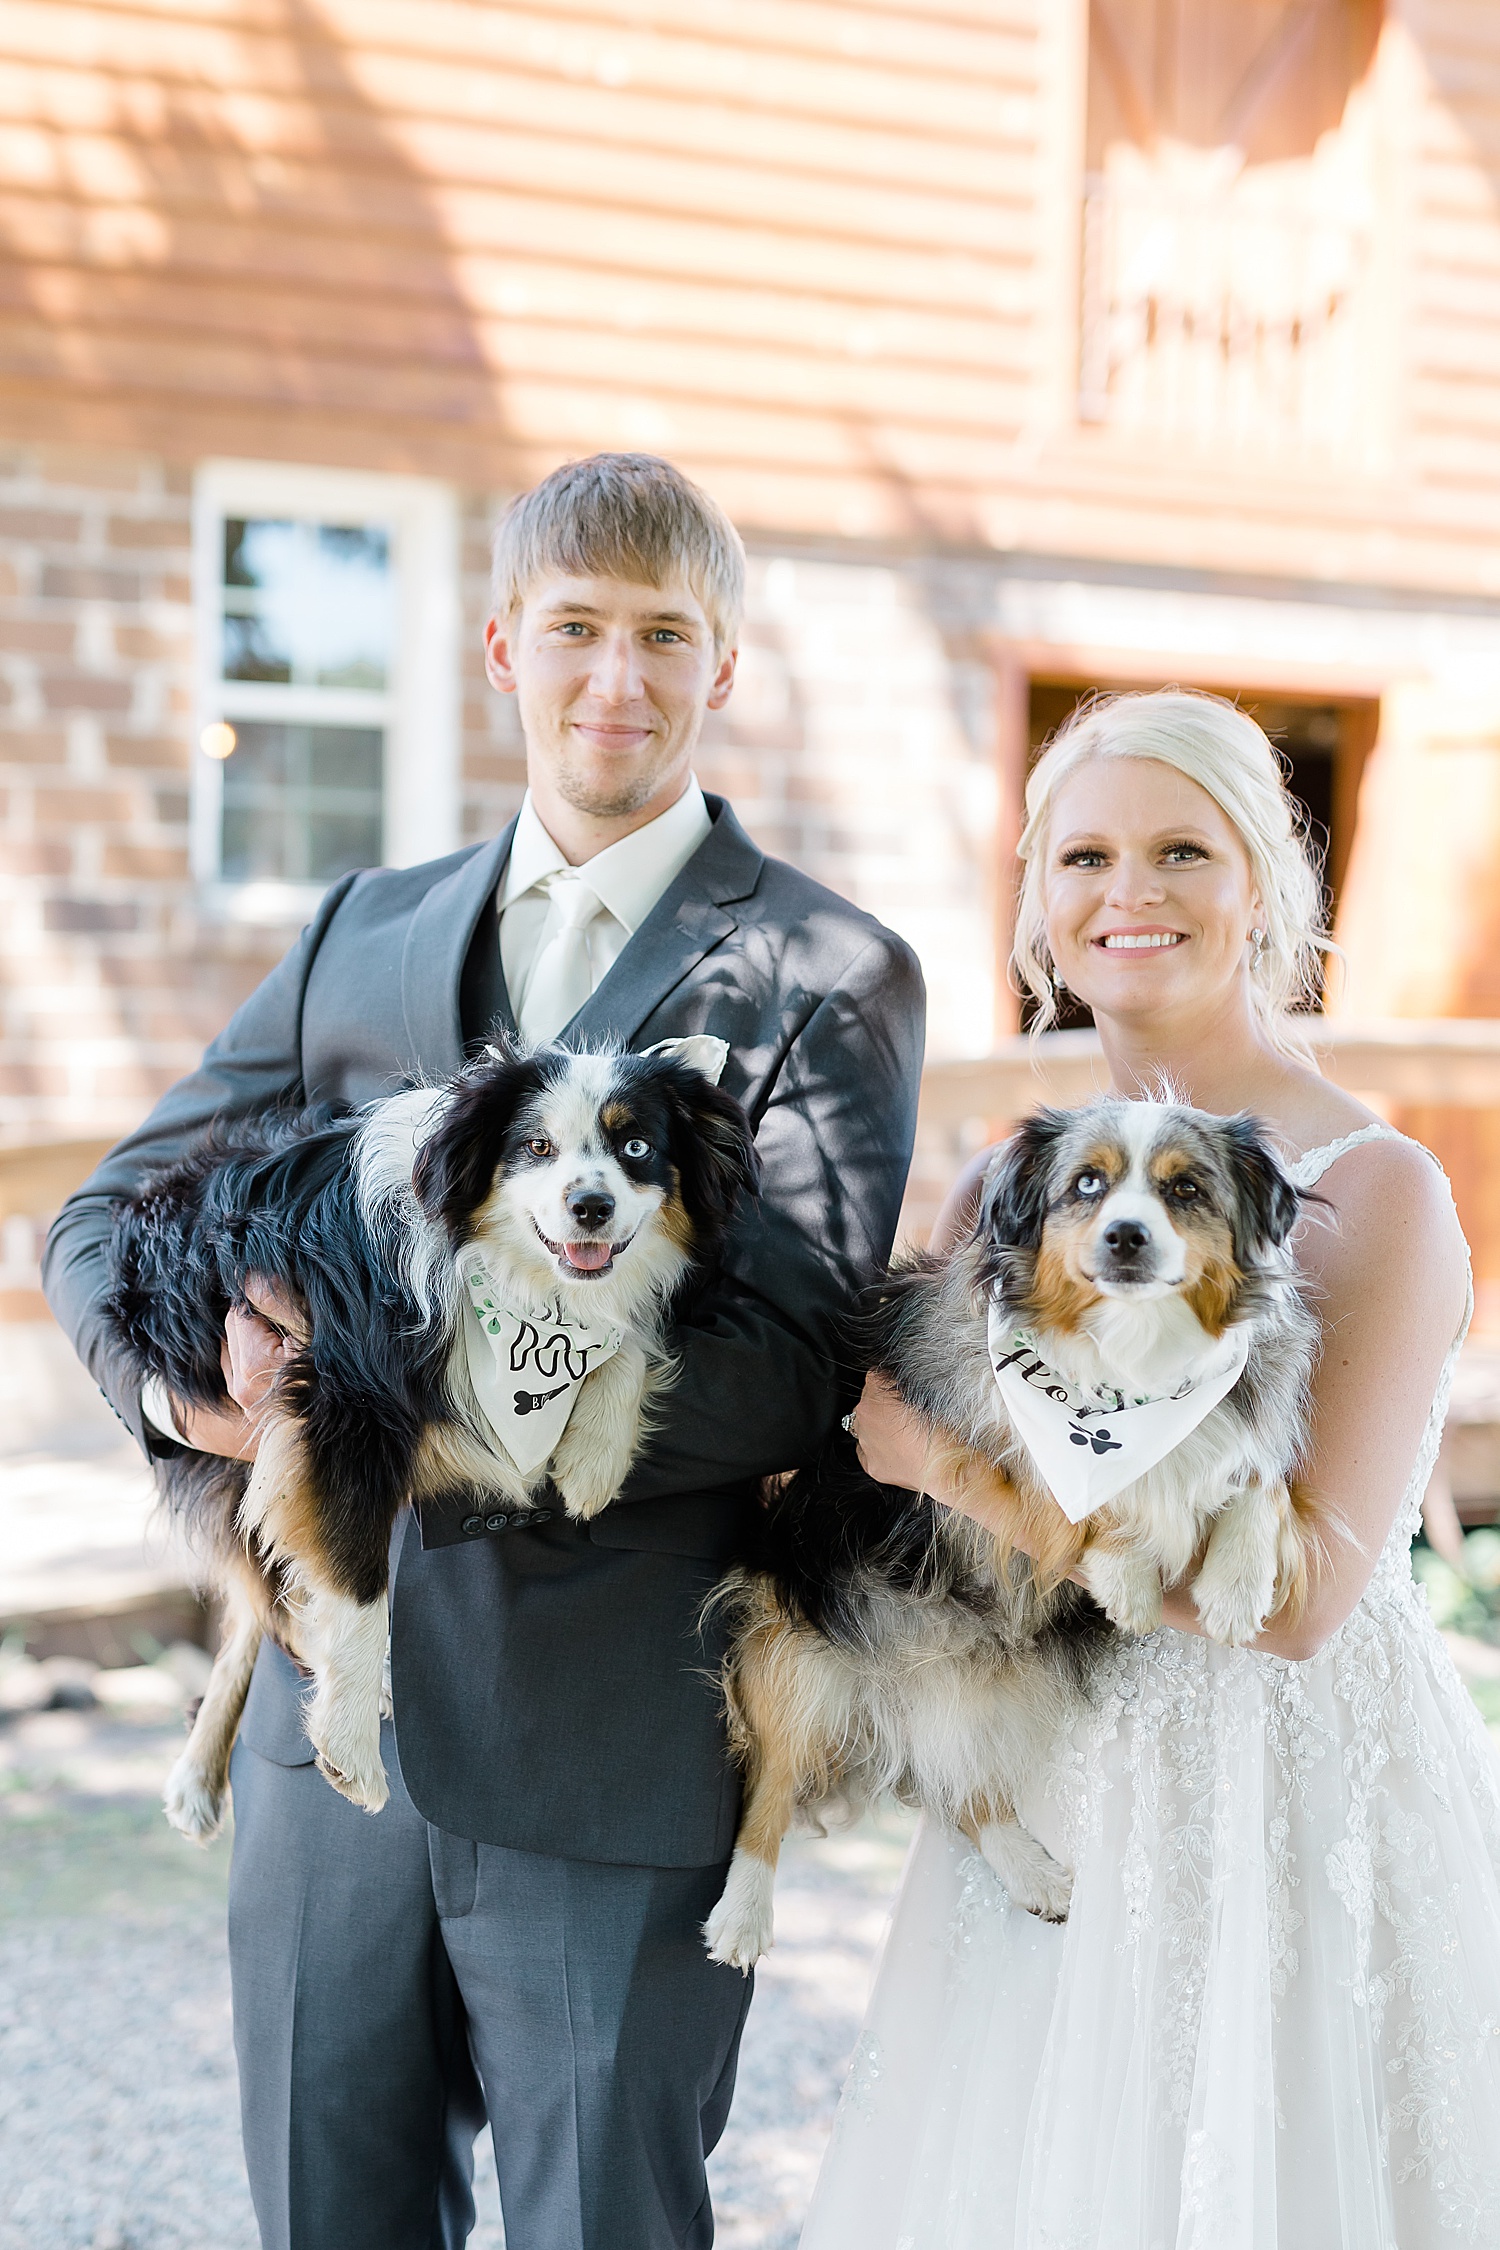 Bride and groom holding dogs at their wedding venue 